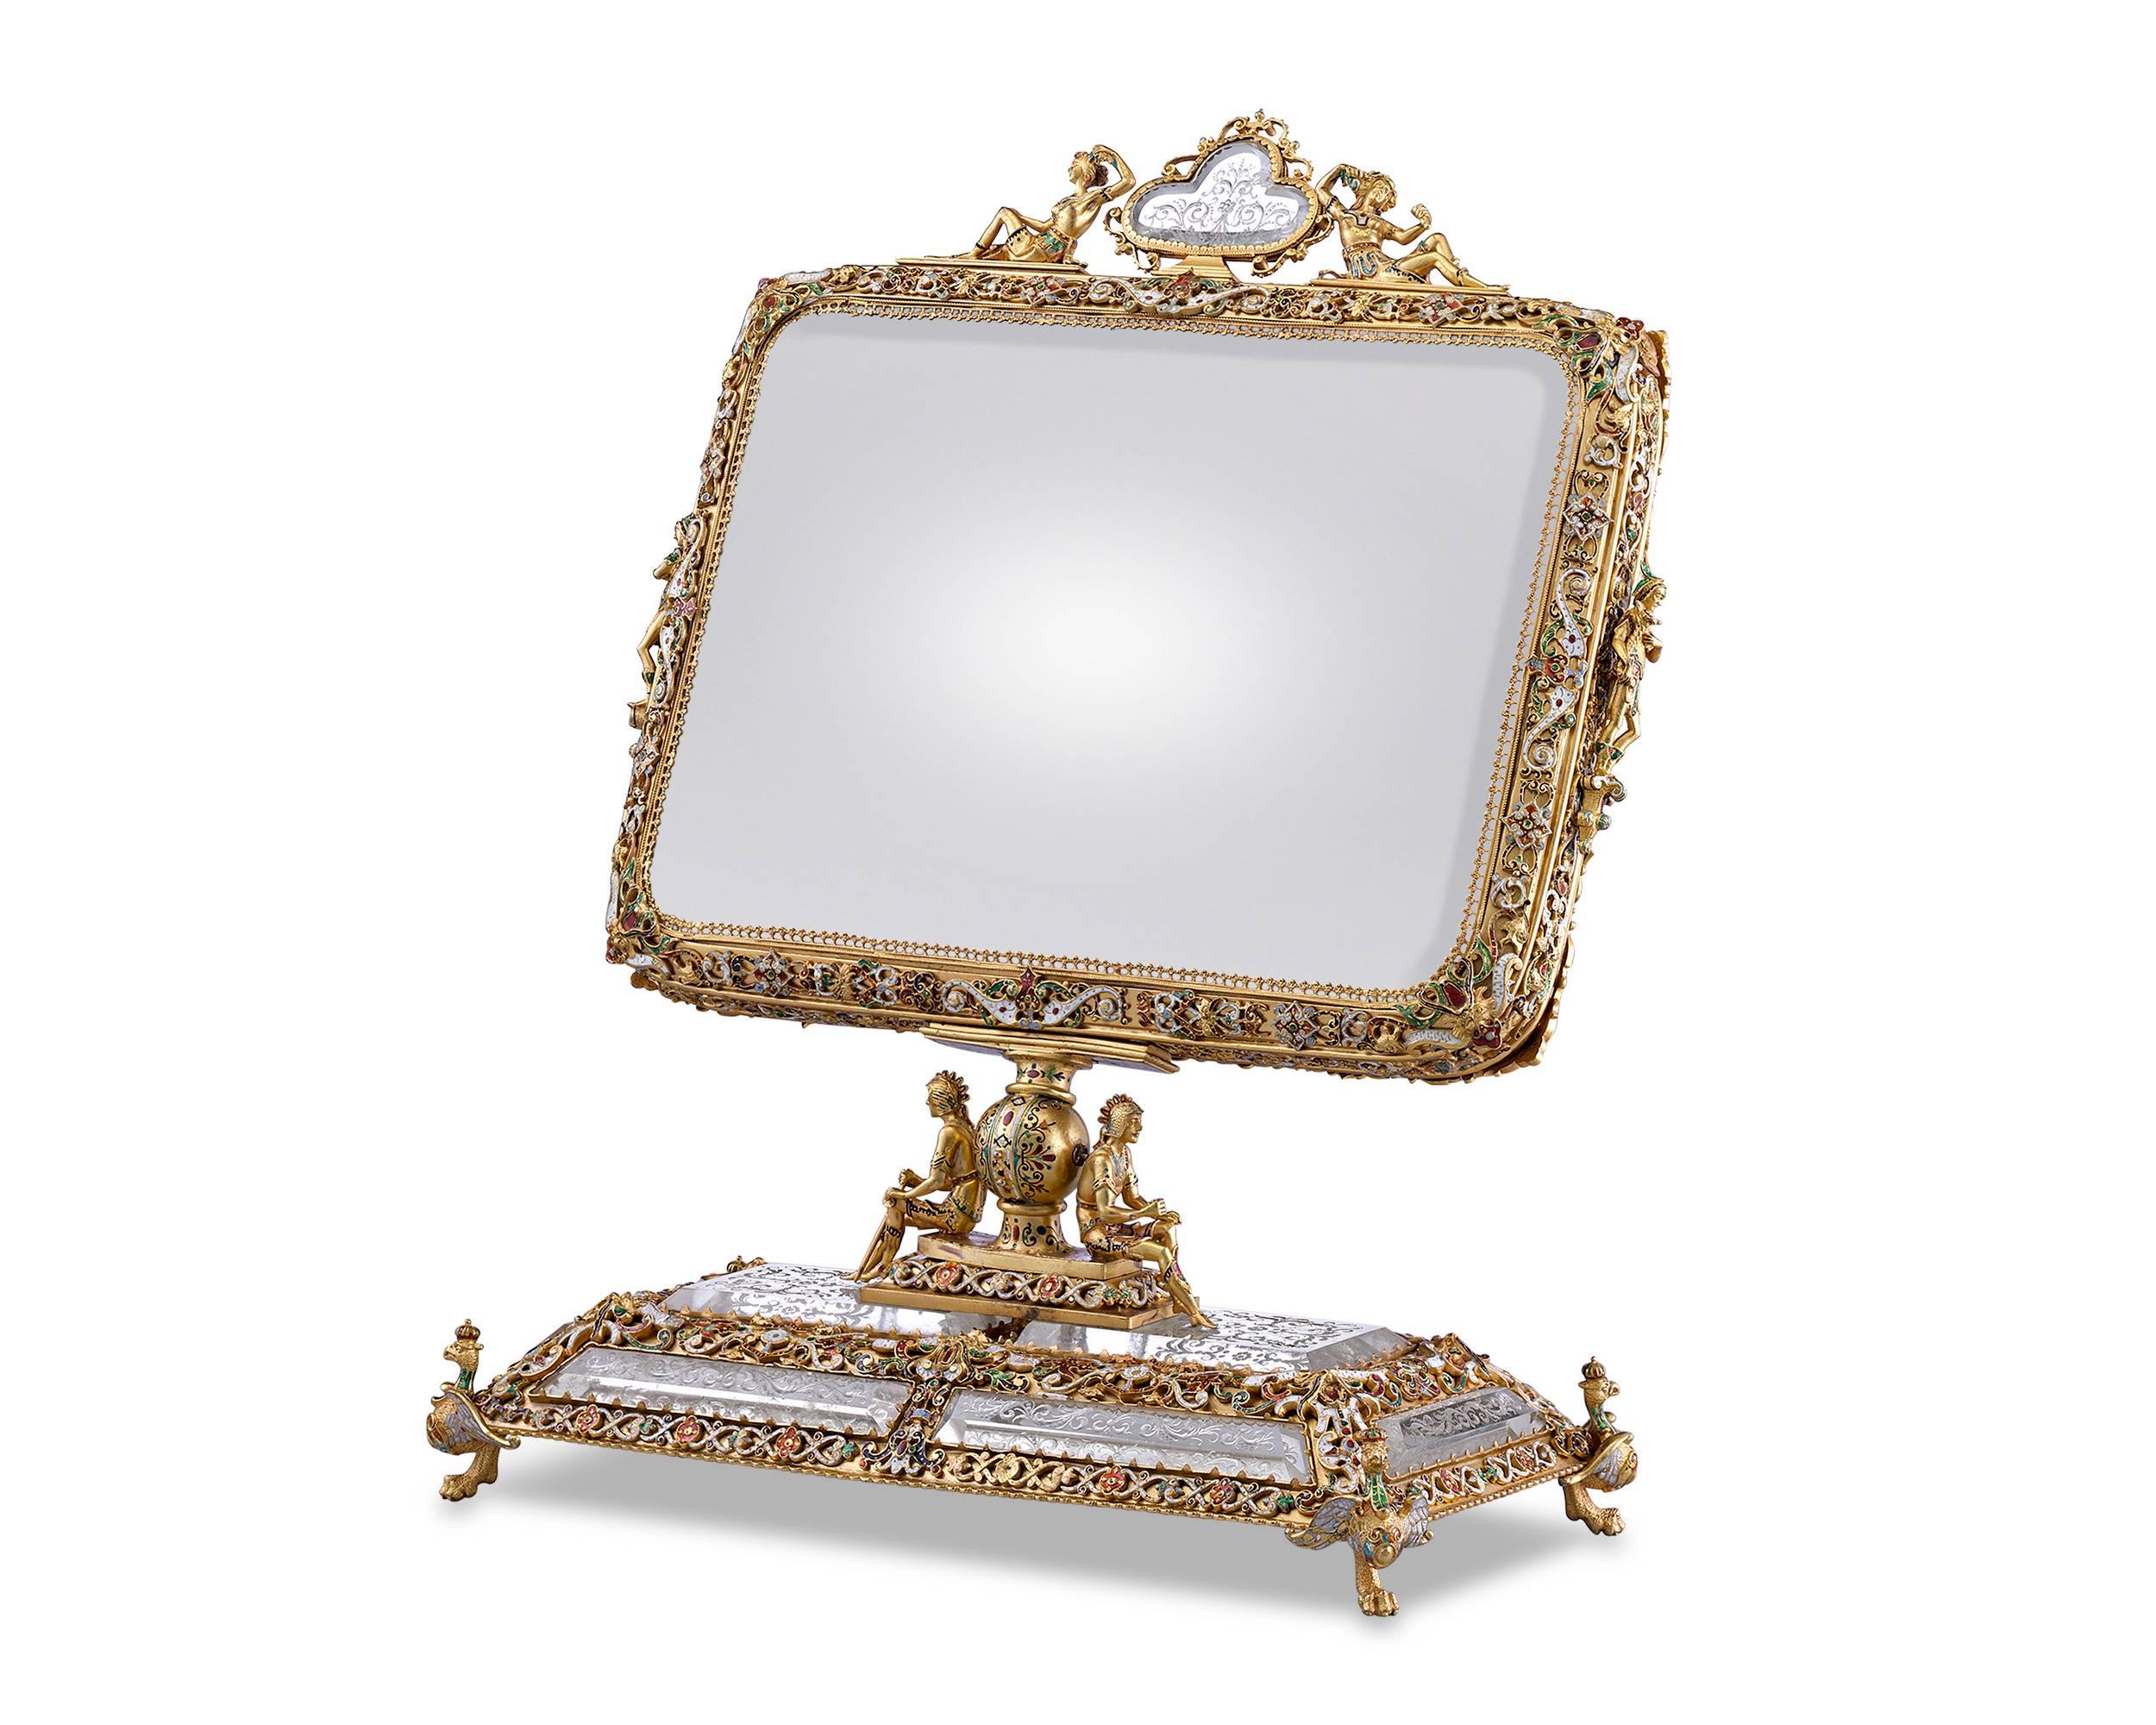 This magnificent Viennese mirror combines the mastery of the Viennese enameling tradition with the radiance of rock crystal. The silver gilt pieces are covered in a complex design of champlevé and relief enameling, while panels of intricately etched